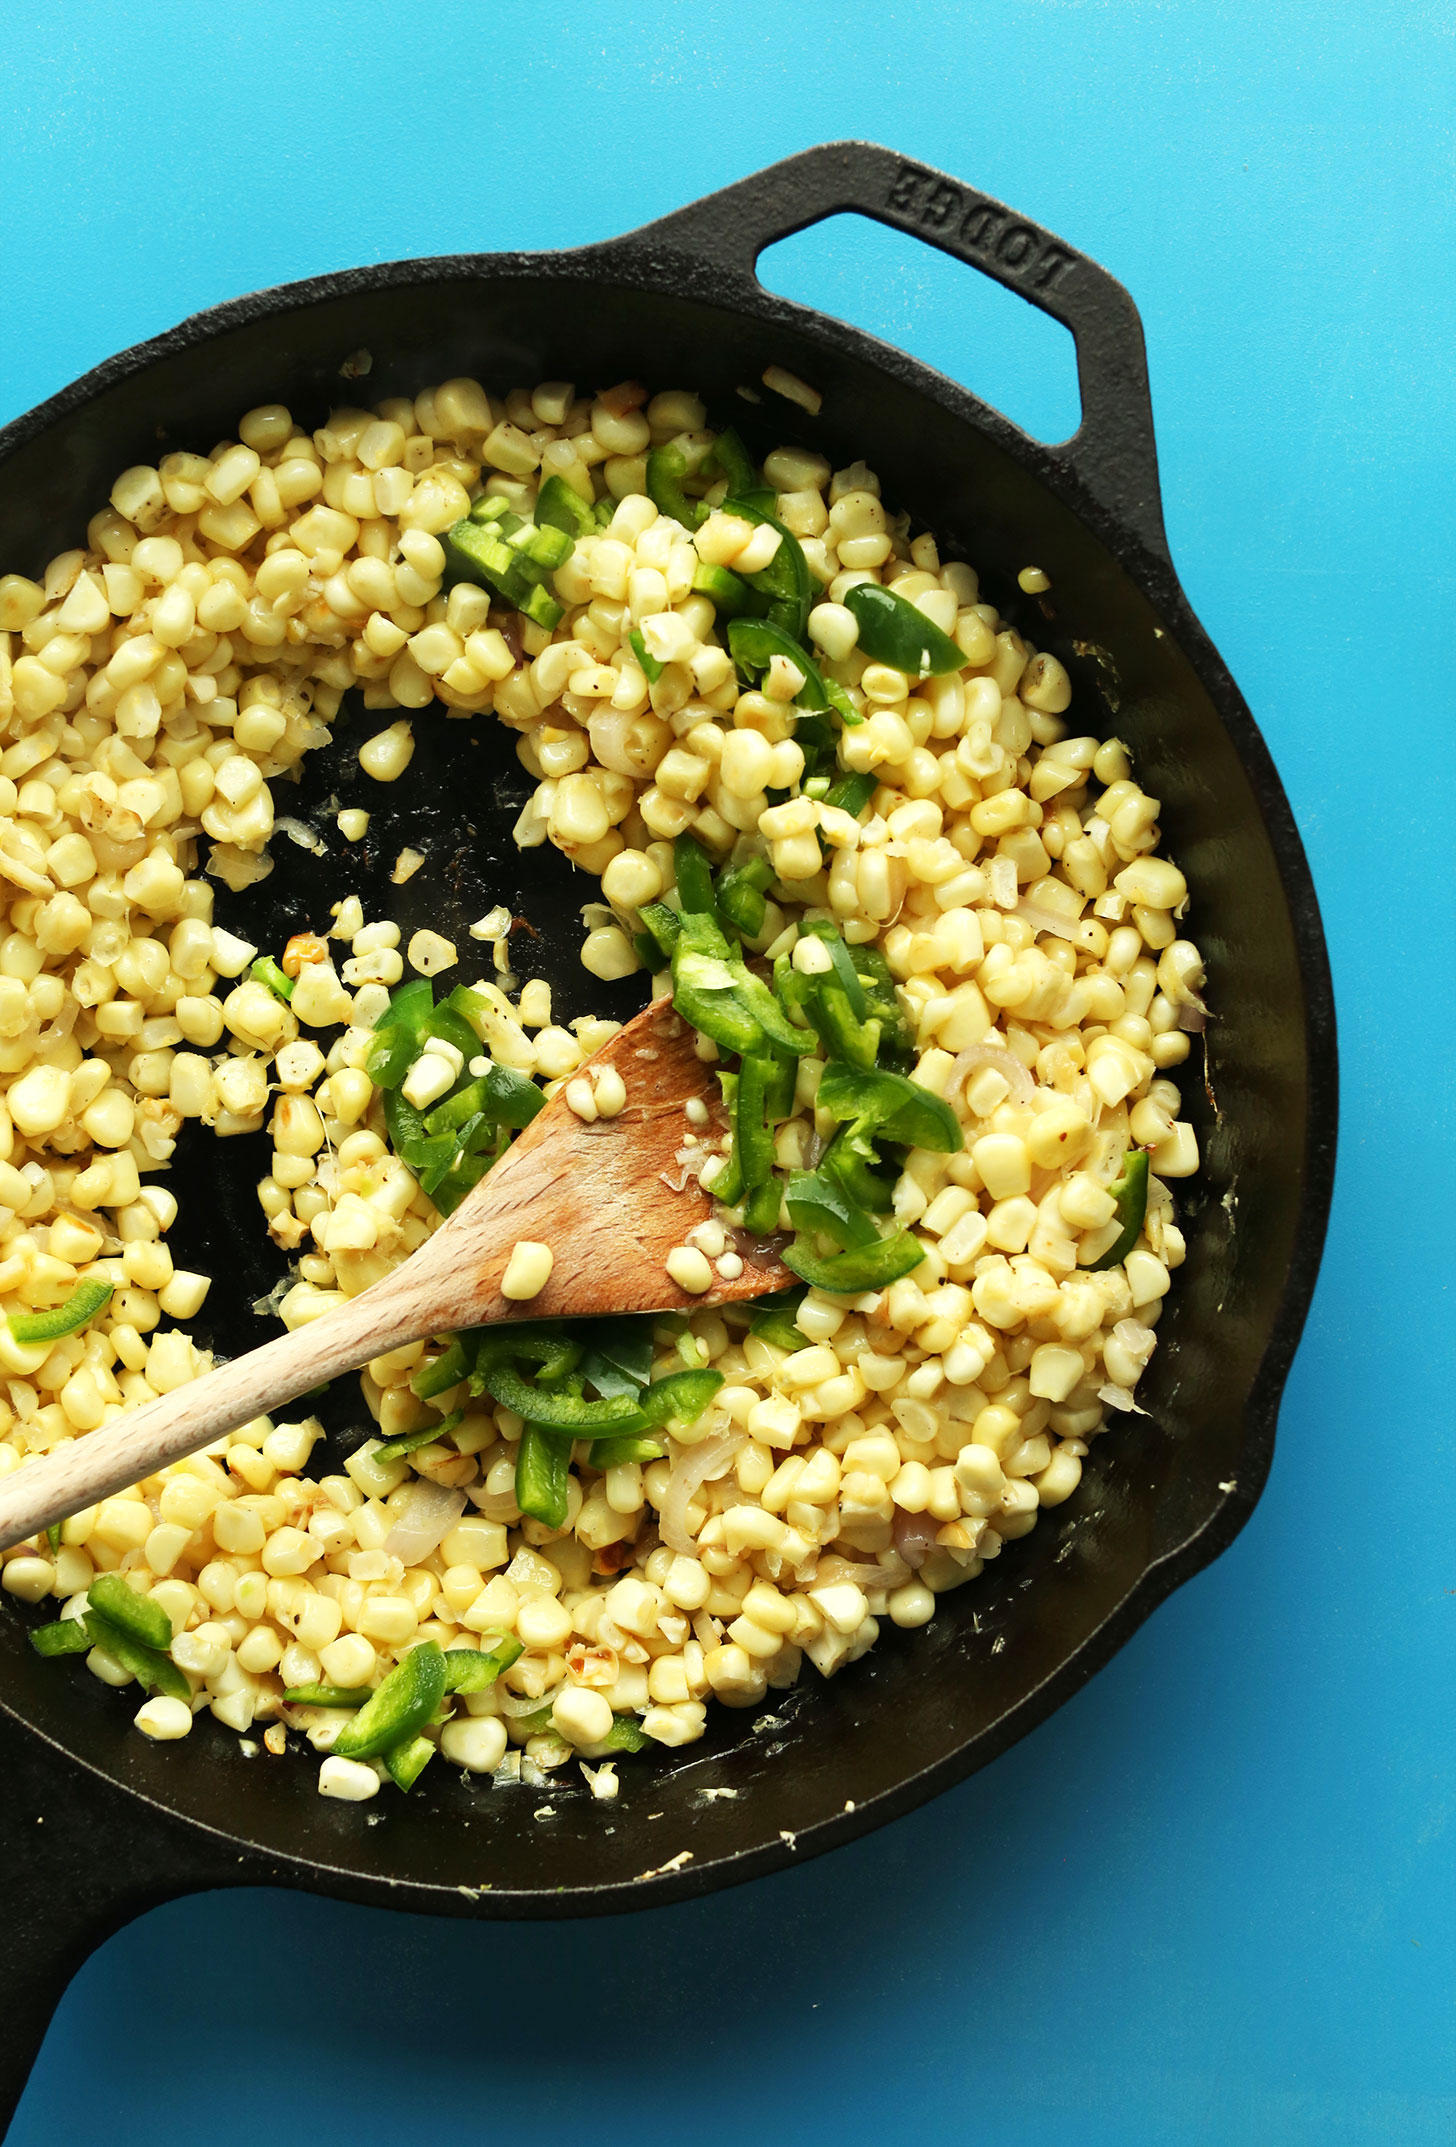 Cooking corn and jalapenos in a cast-iron skillet for our Cheesy Vegan Corn Dip recipe